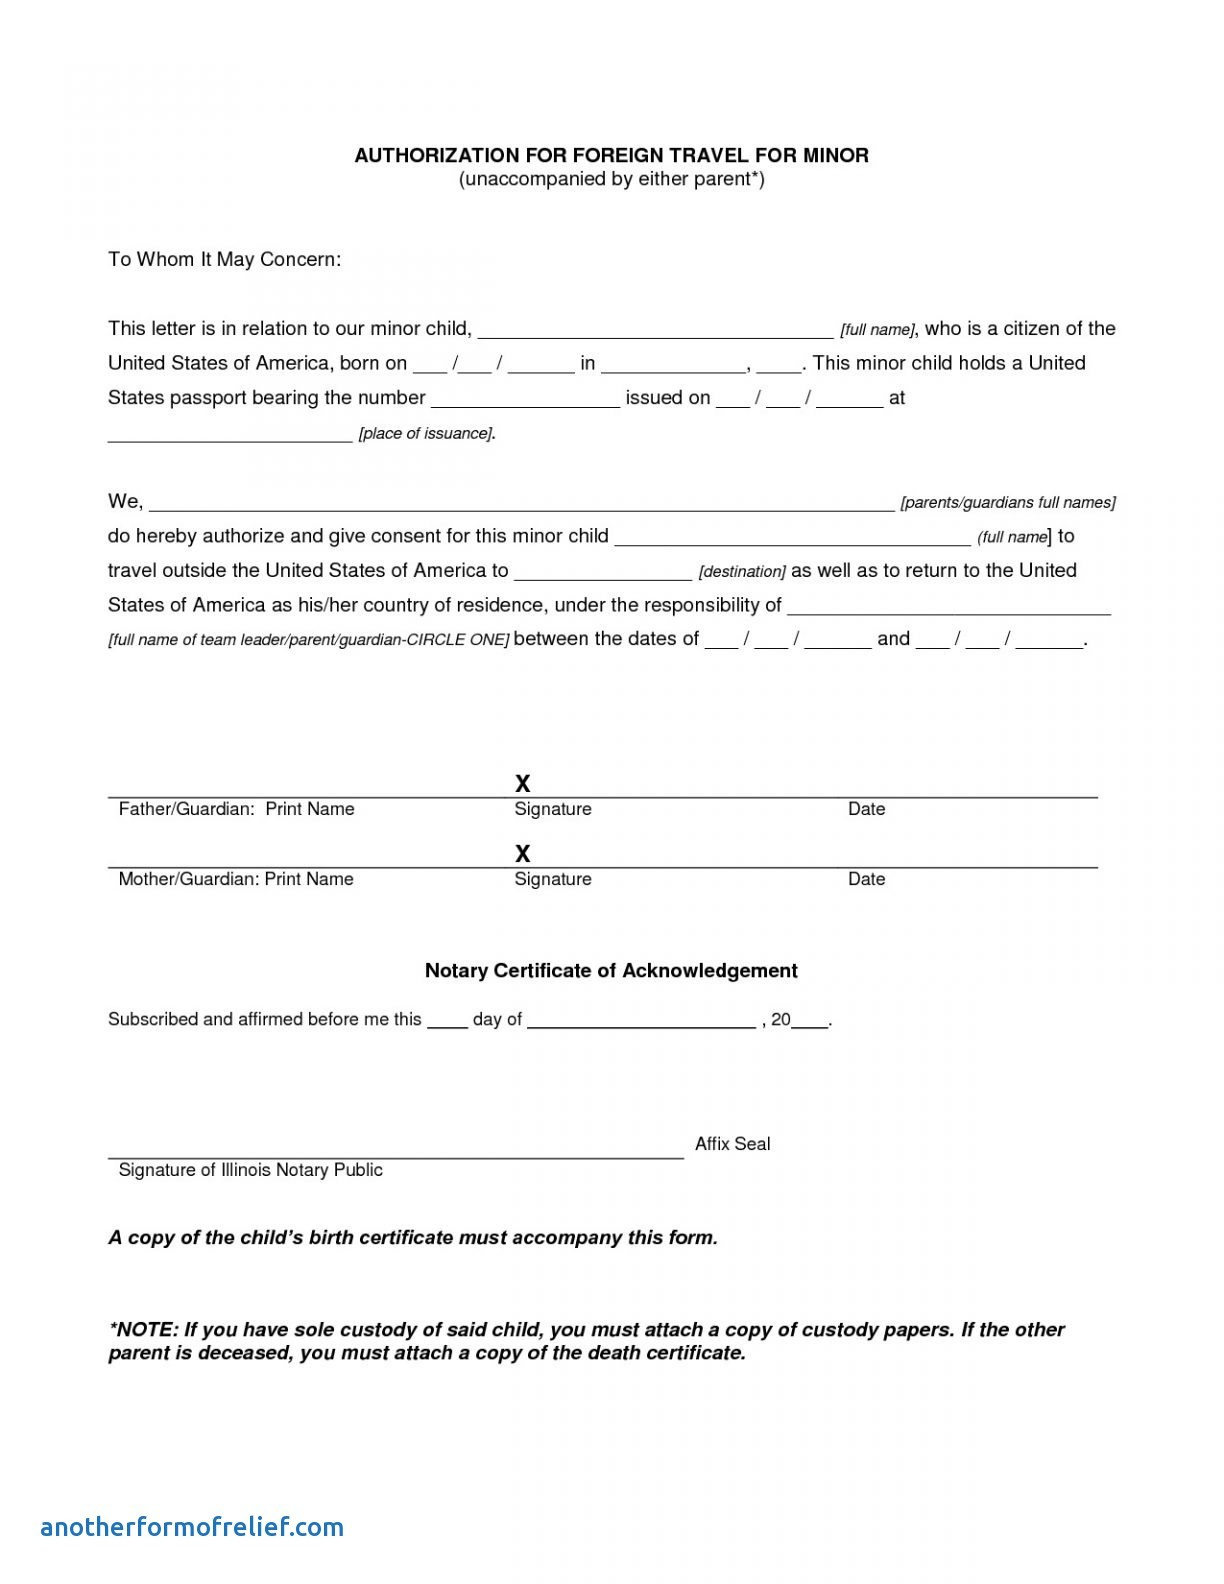 Parental Consent Permission Letter Template - Permission Letter to Travel Refrence Microsoft Word Consent